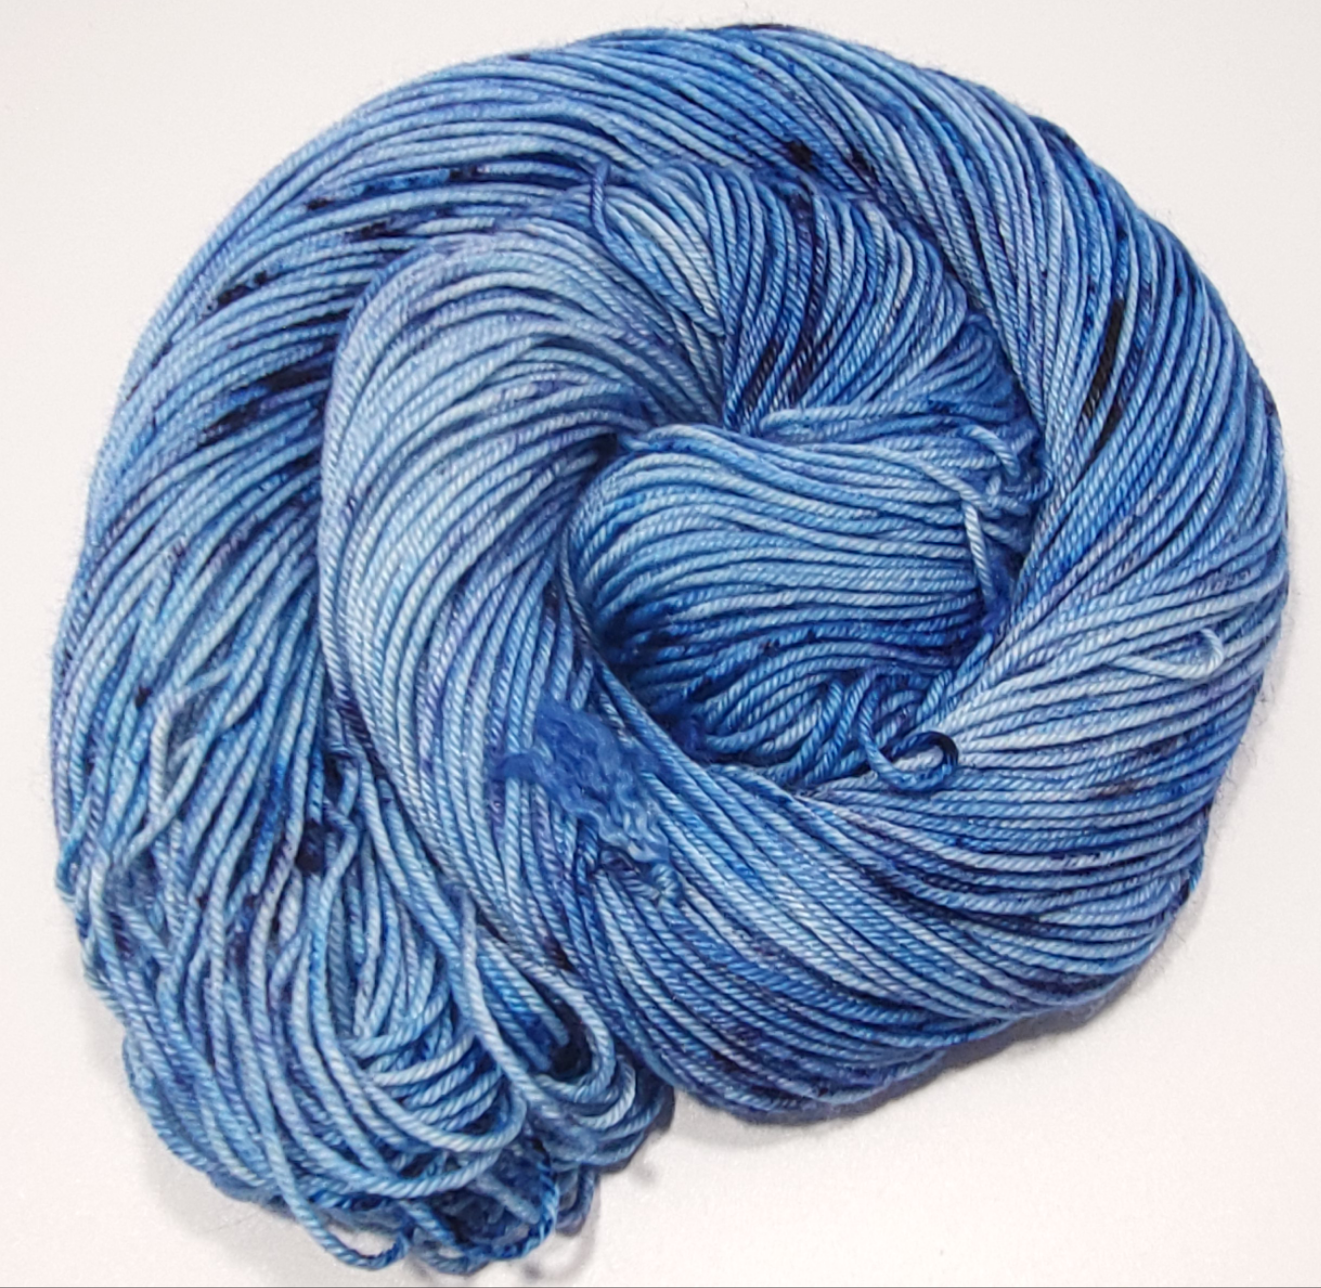 Hat full of sky - BFL/Silk/Cashmere